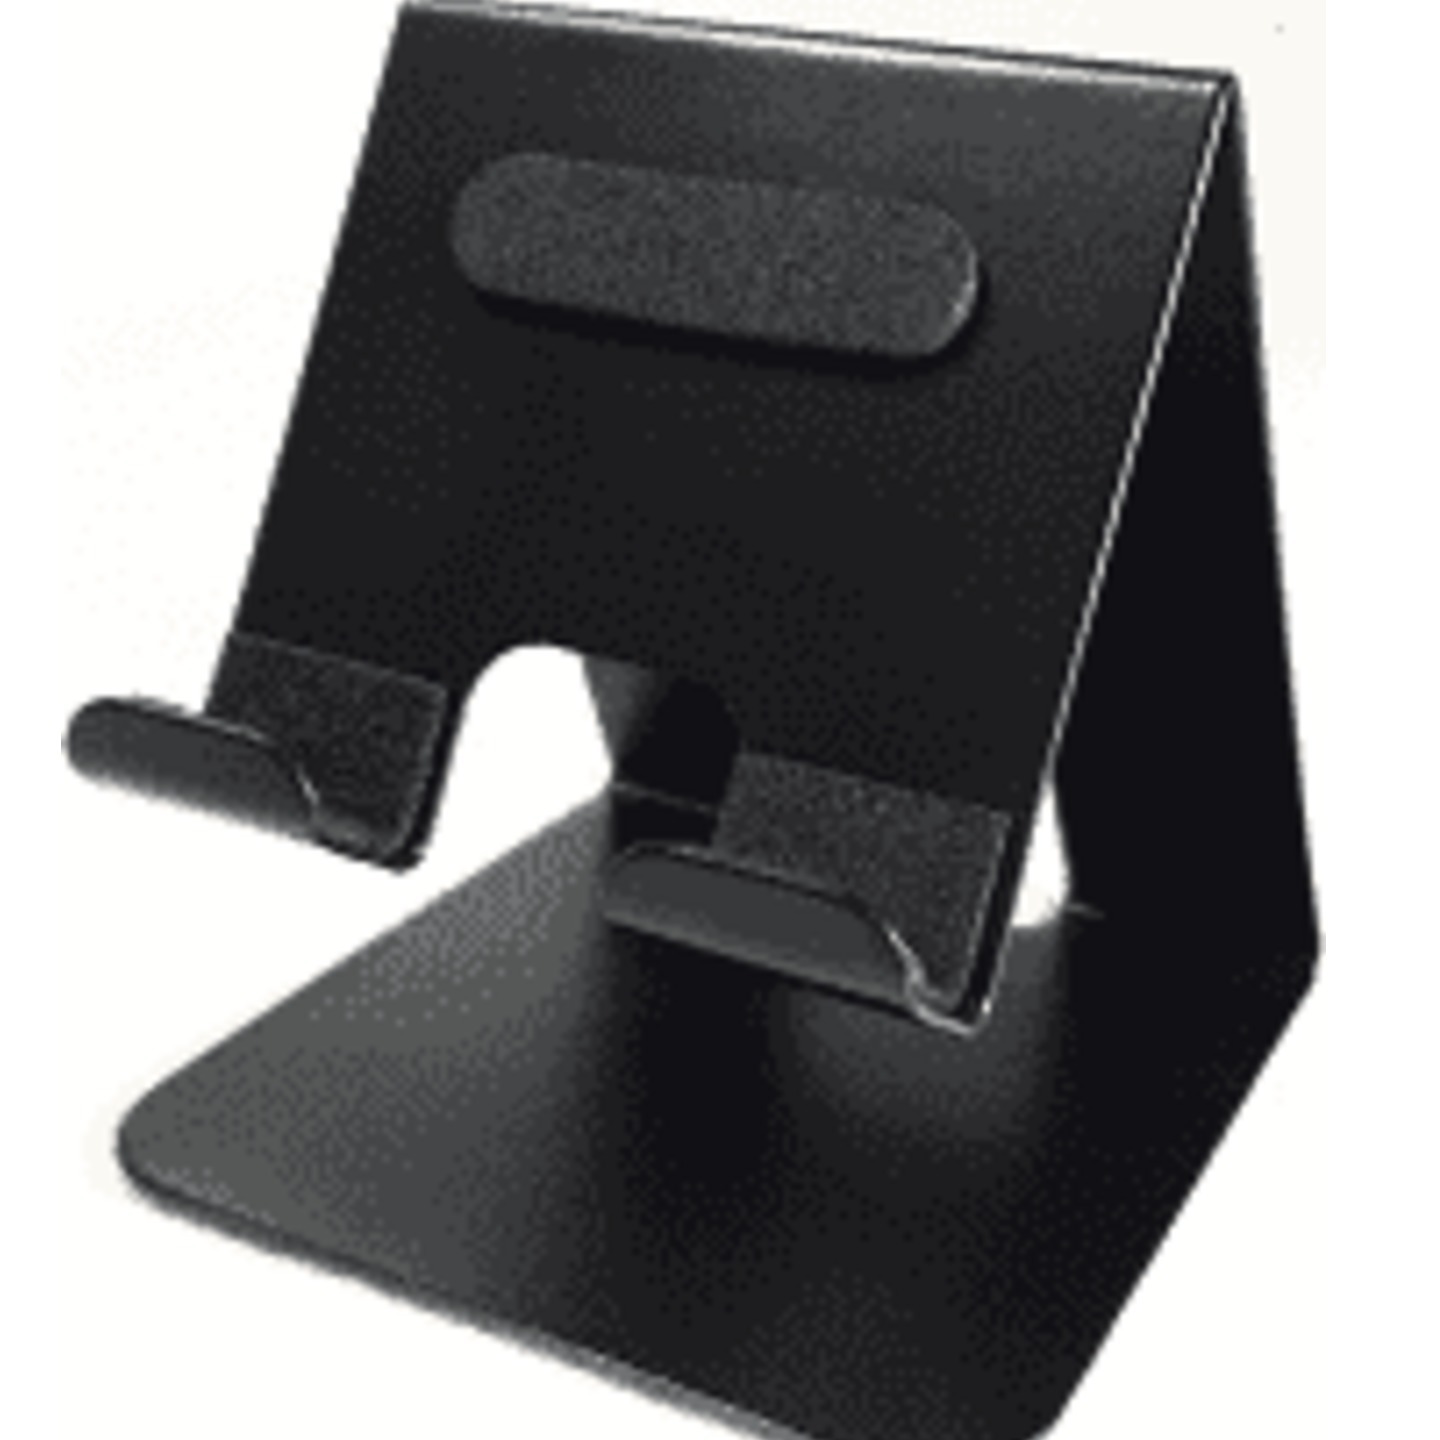 Mobile Holder | Phone Stand | Phone Stand for Table | Mobile Stand for Online Classes, Mobile Stand for Table and Bed, Mobile Holder for Bed, Phone Holder, Phone Stand for Table